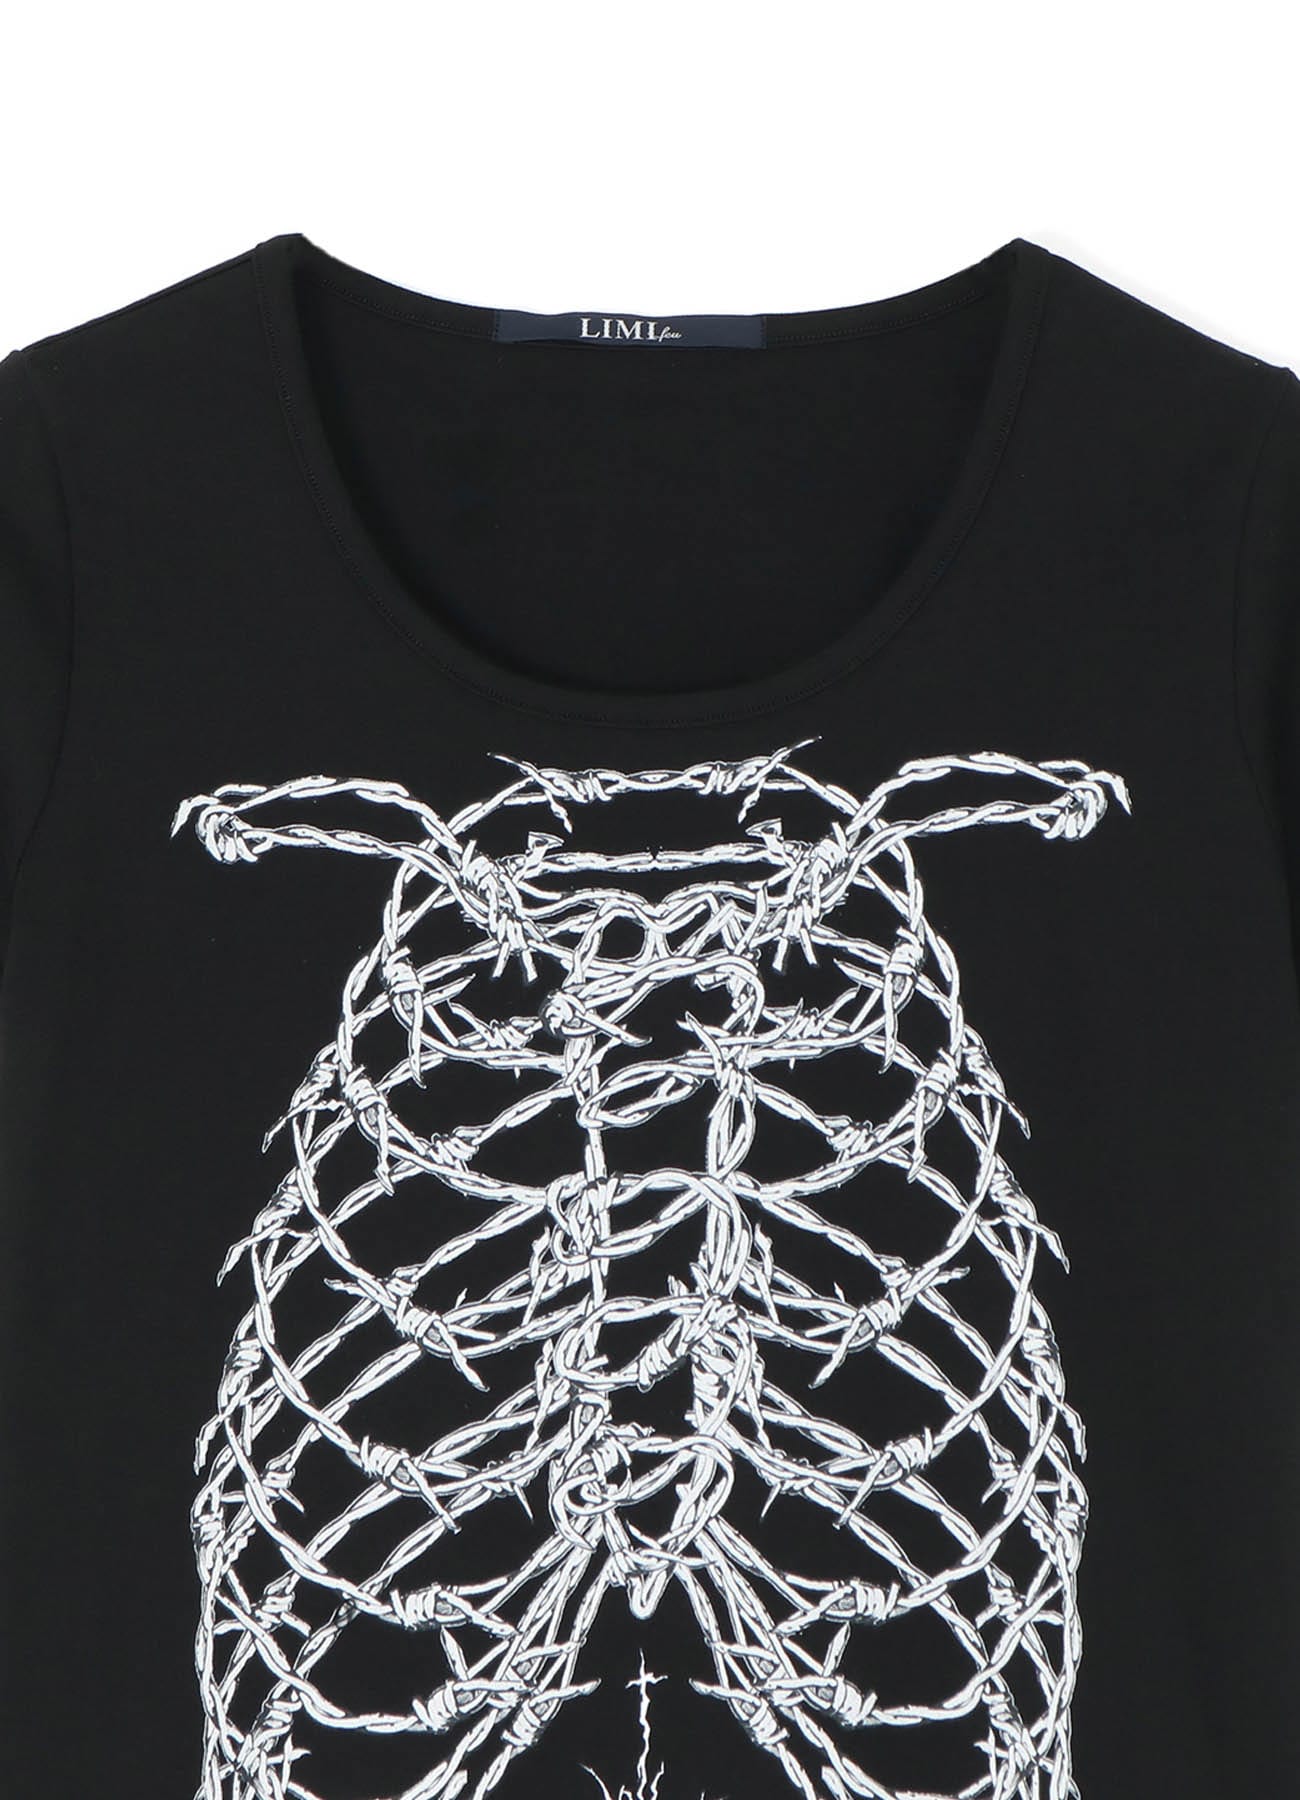 Rib Barbed Wire Short Sleeve T